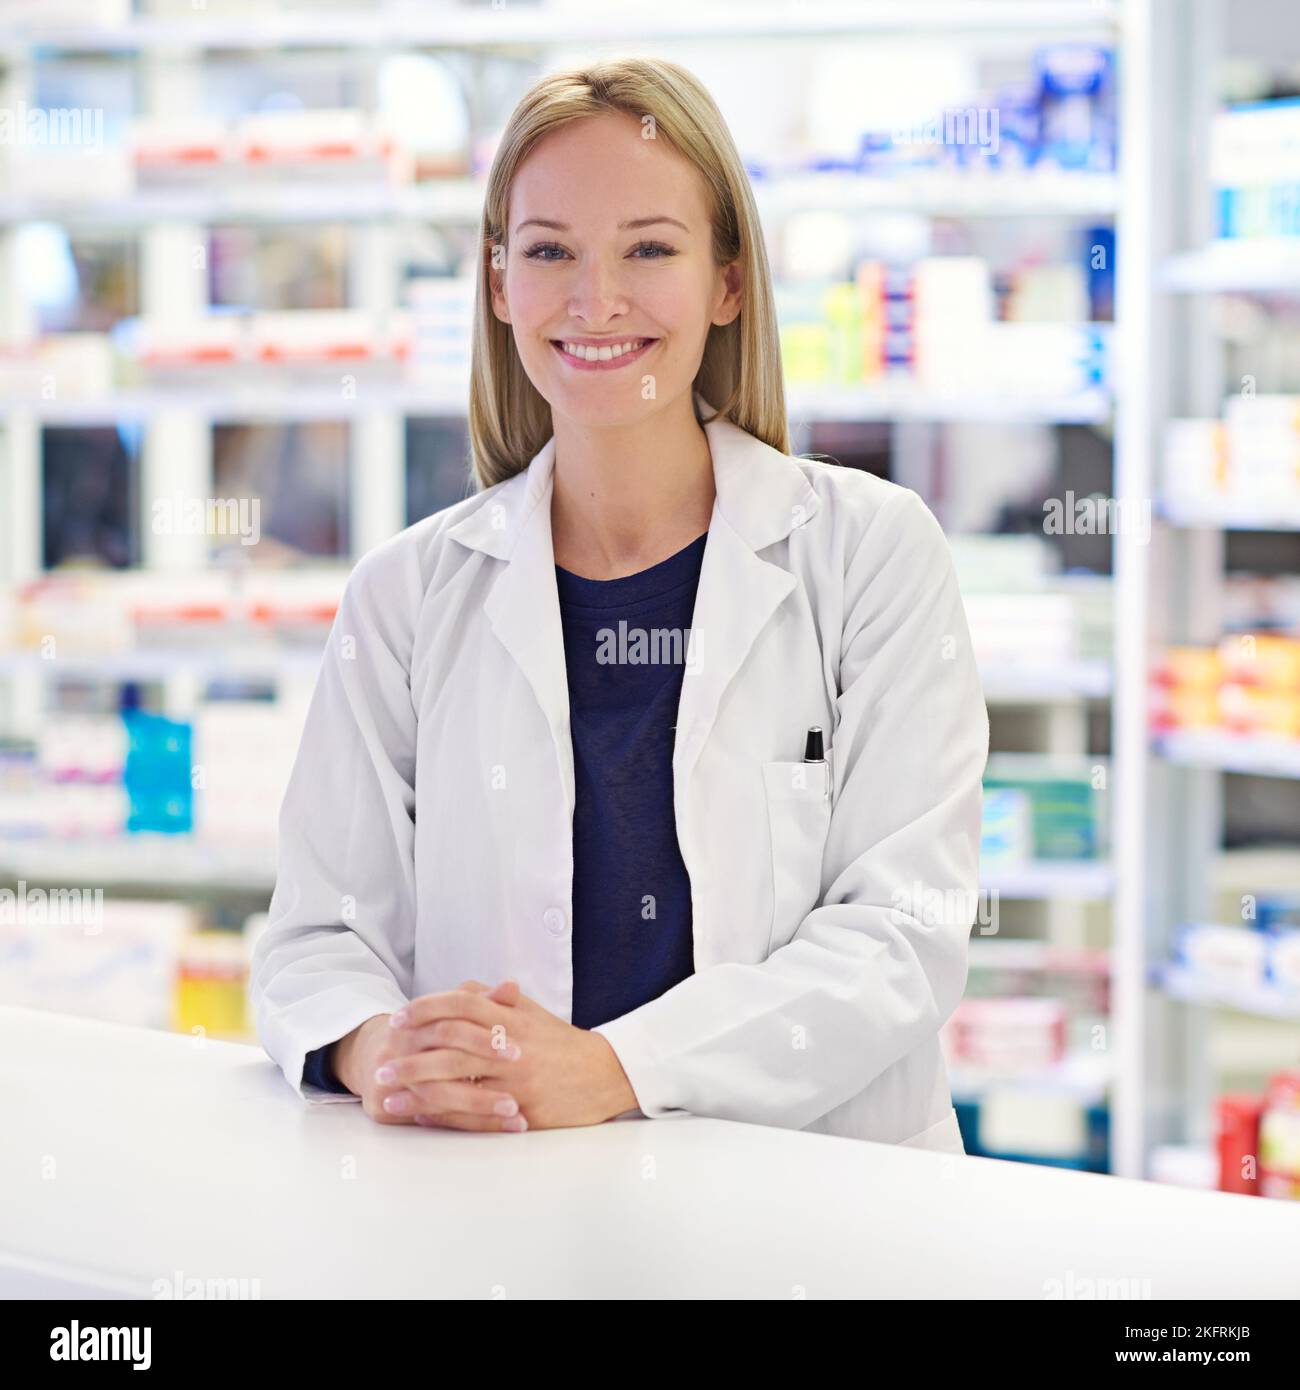 You friendly neighborhood pharmacist. Portrait of an attractive pharmacist standing at the prescription counter. Stock Photo